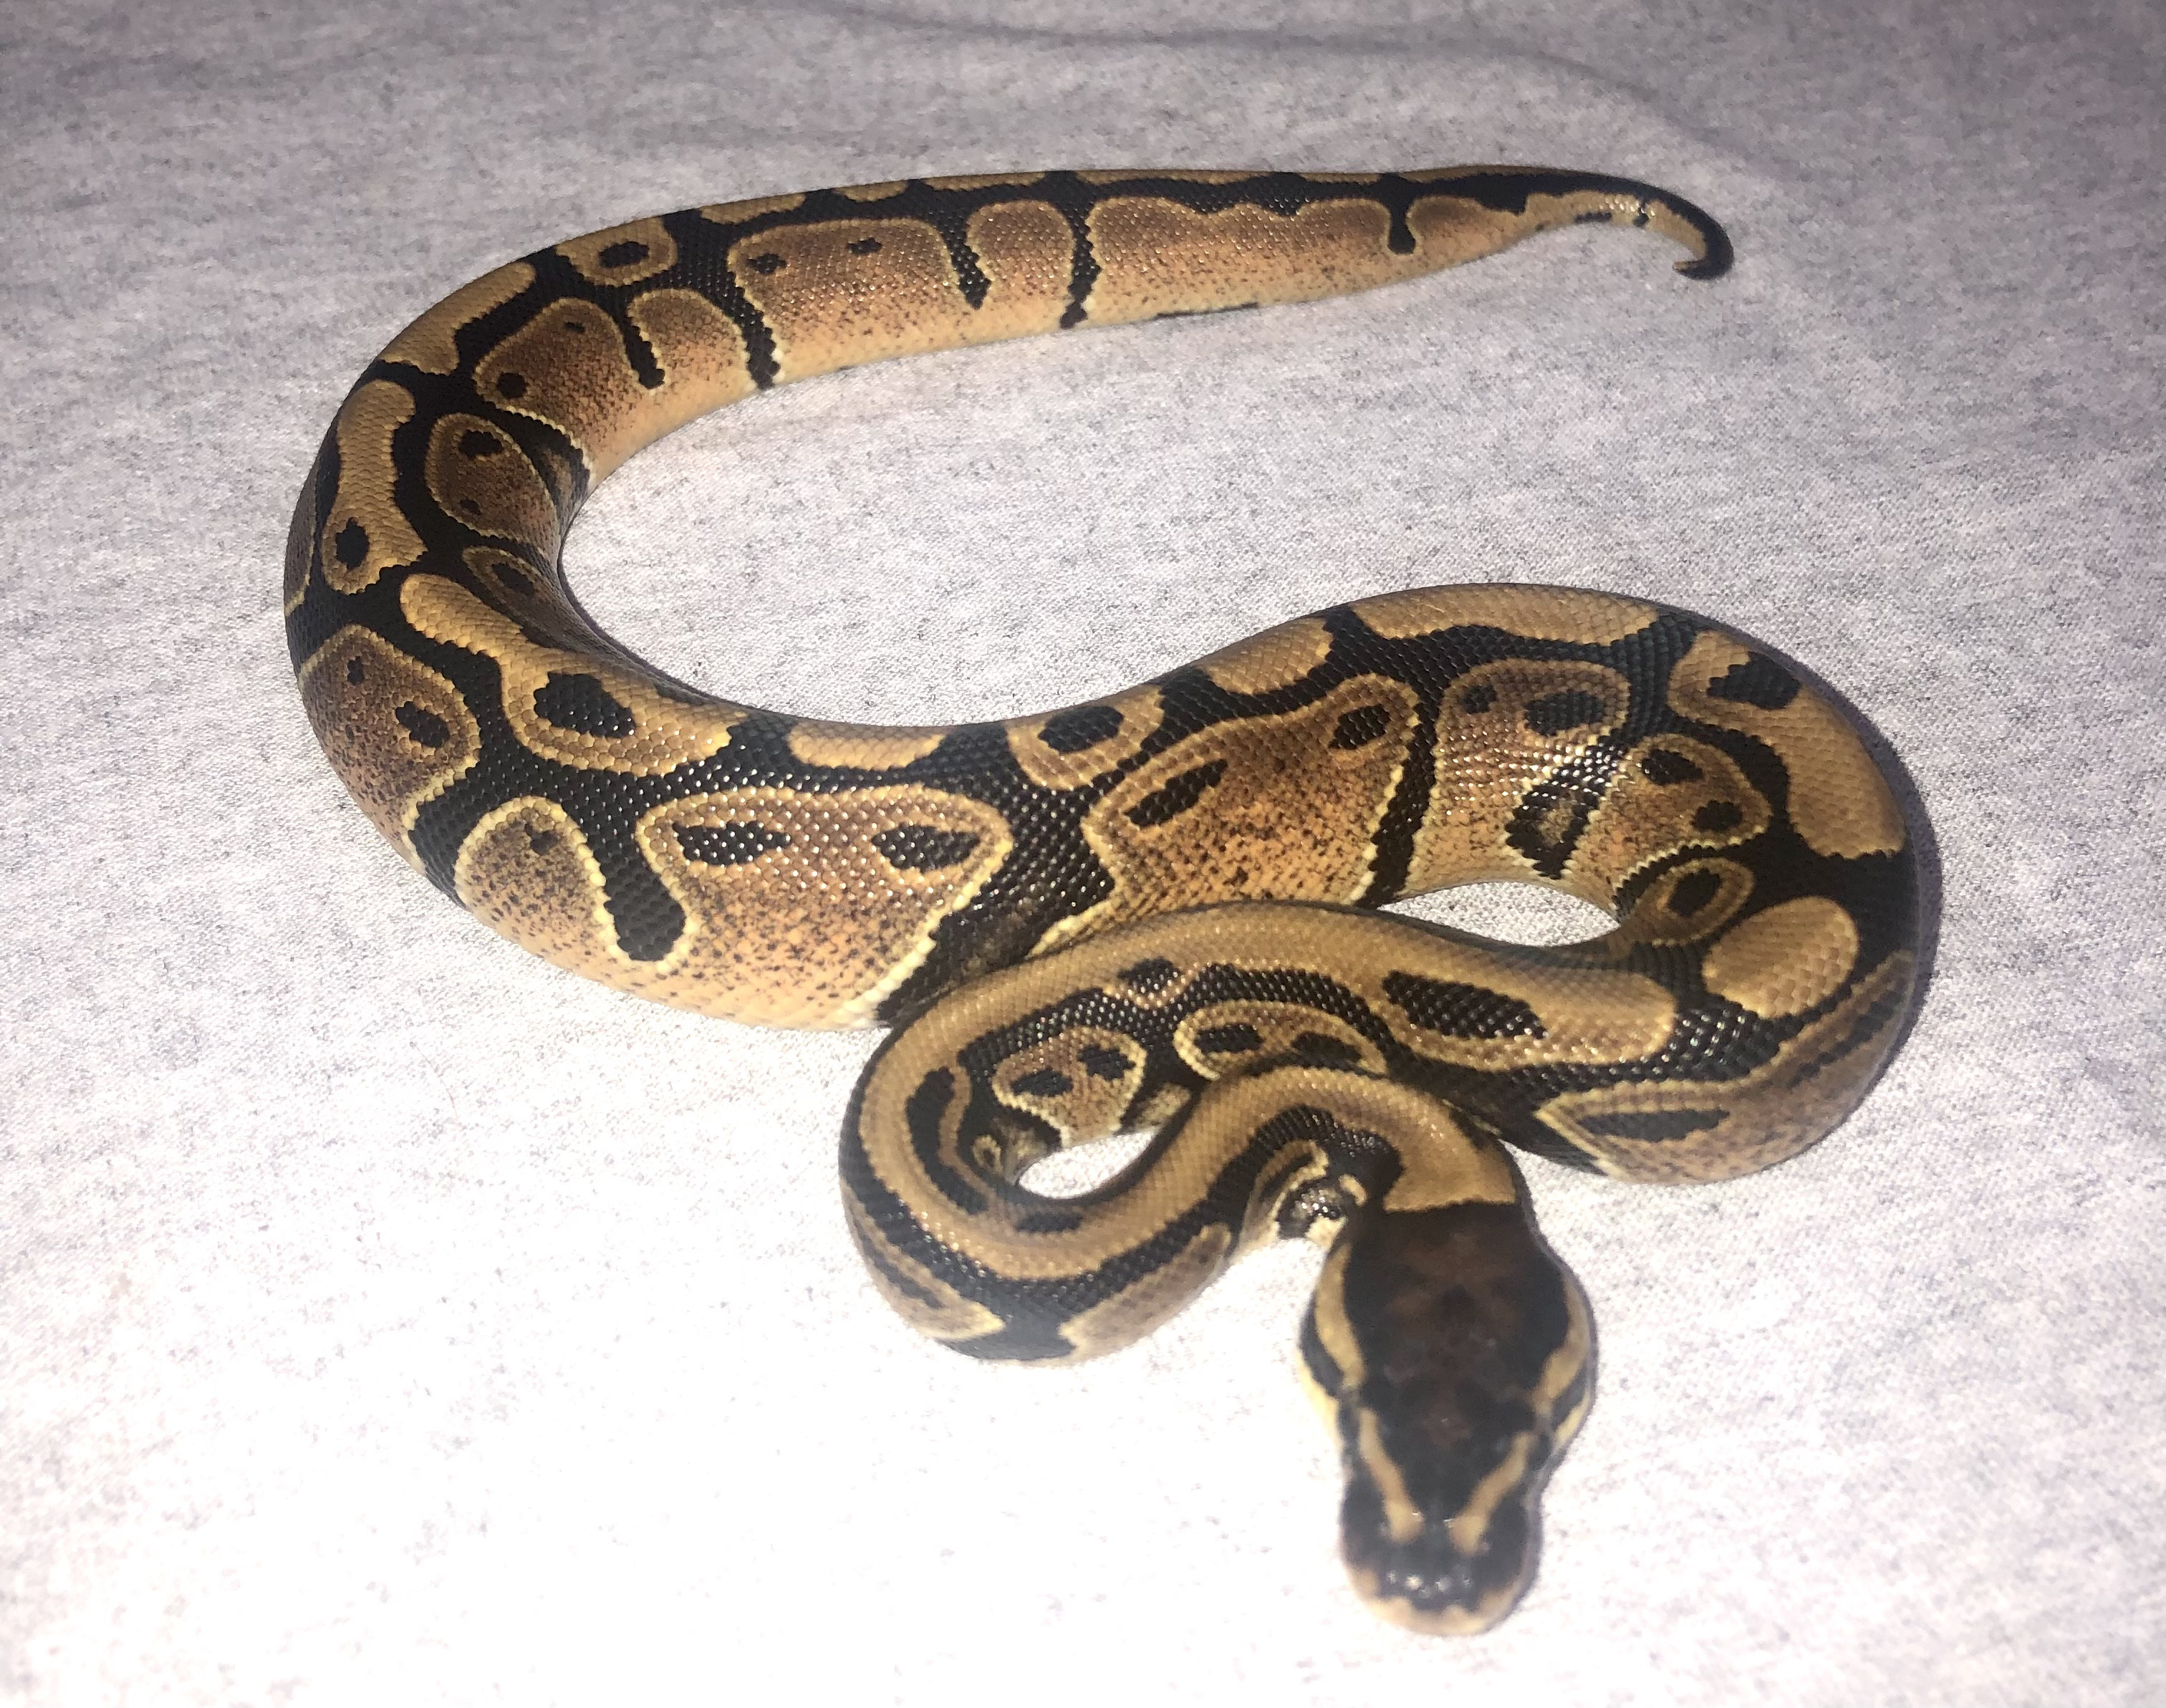 X-treme Gene Ball Python by Eddie's Reptiles and Rodents